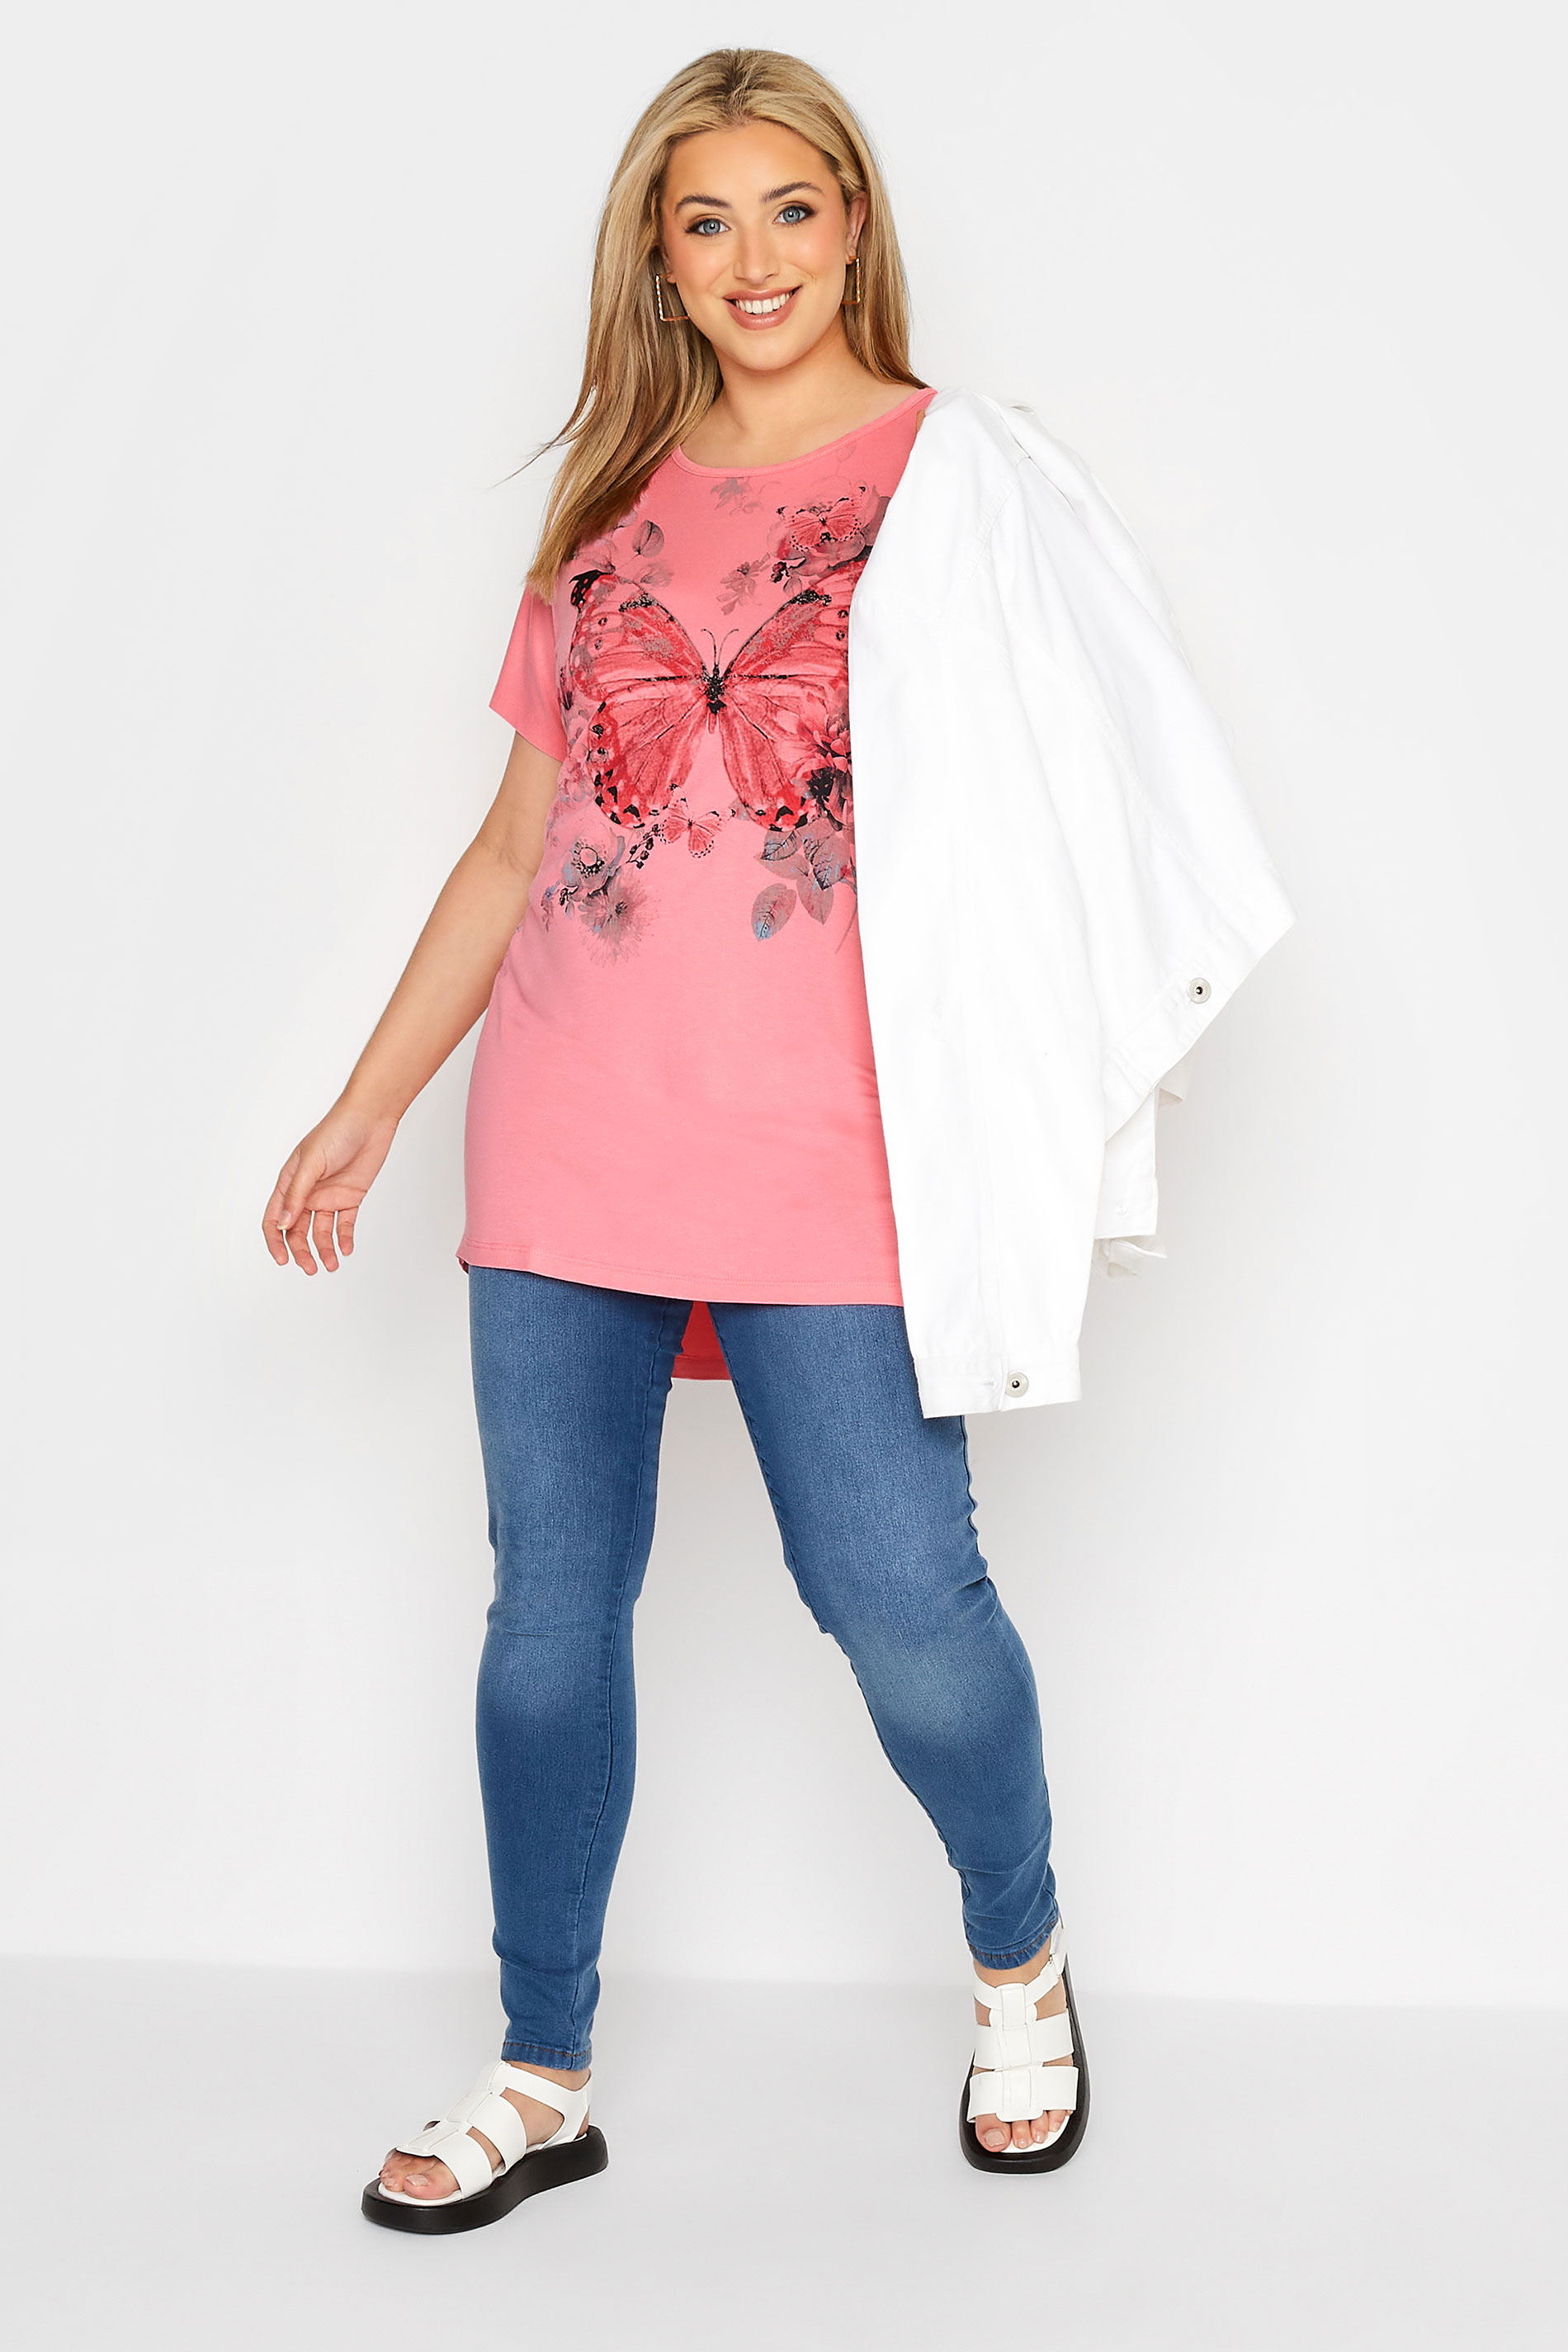 Grande taille  Tops Grande taille  T-Shirts | T-Shirt Rose Design Papillon - RV65759